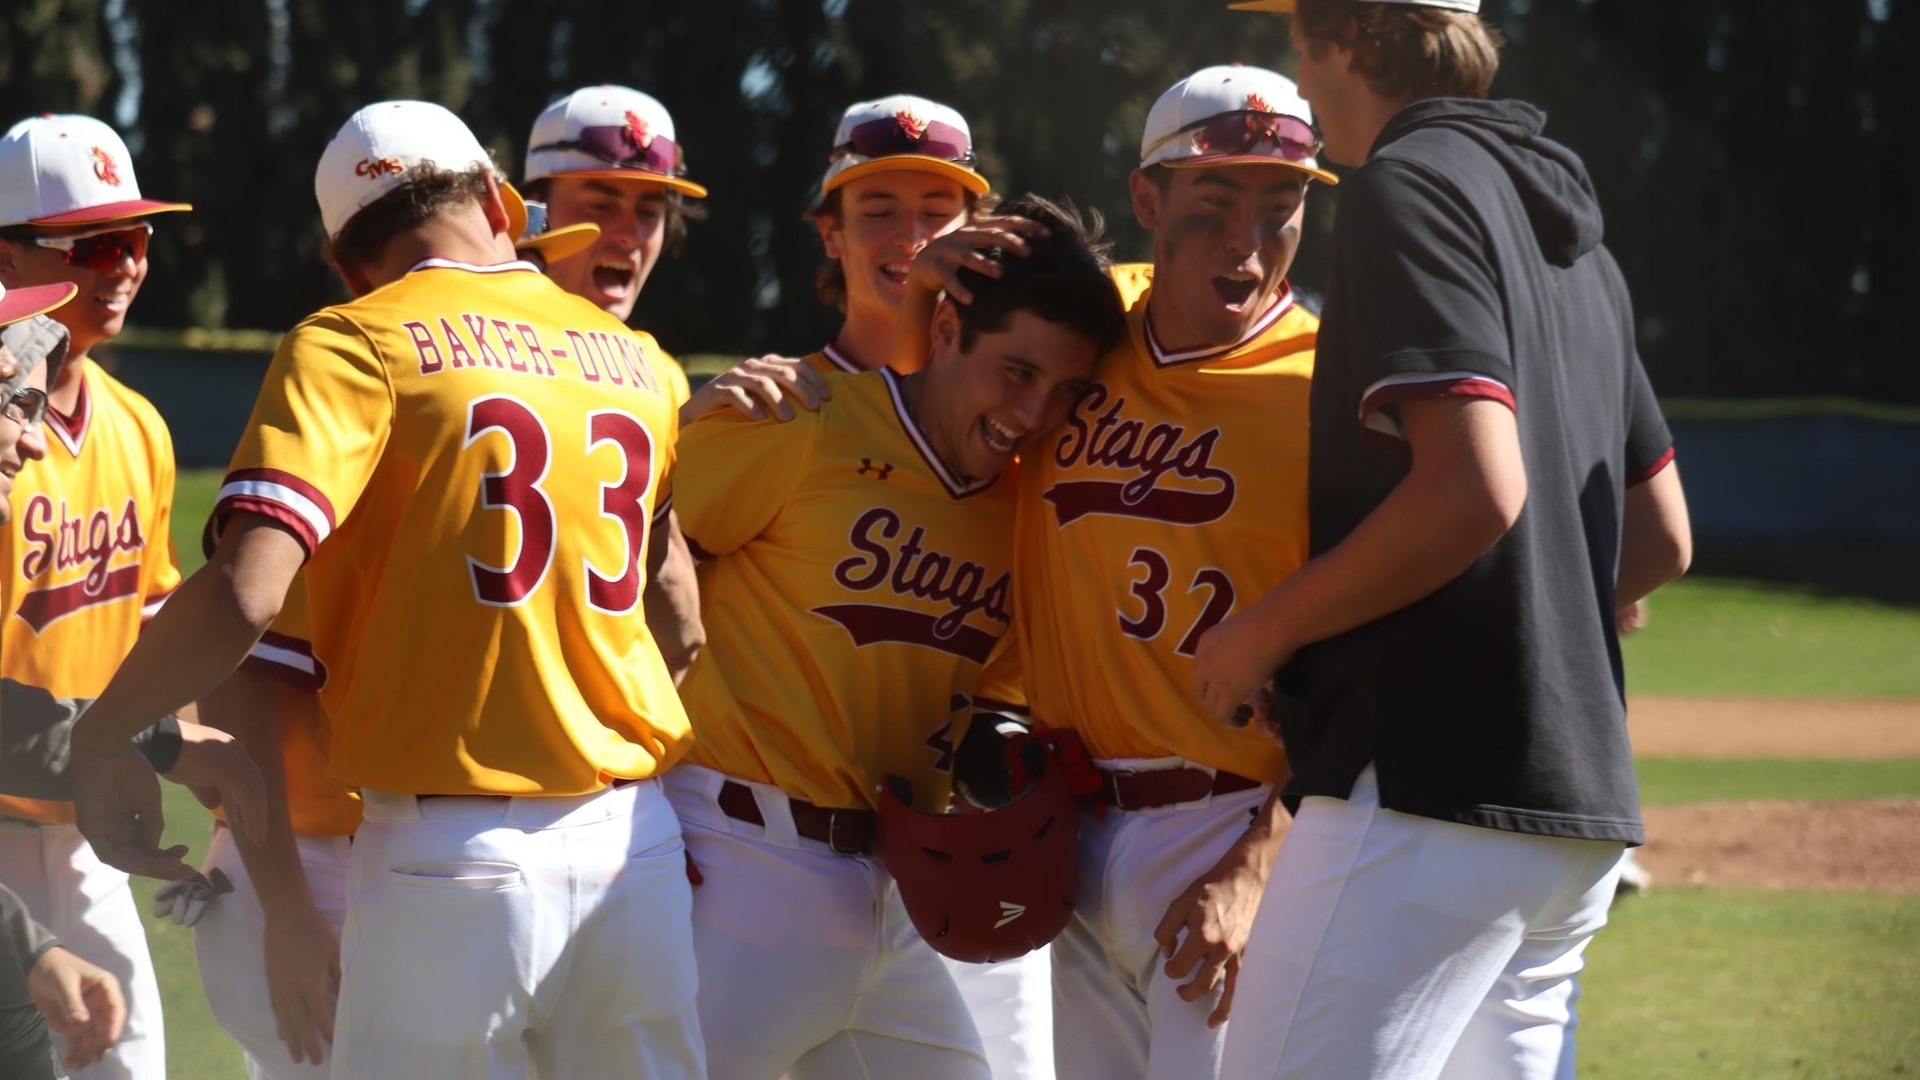 The Stags celebrate the home run from William DeForest (photo by Caelyn Smith)